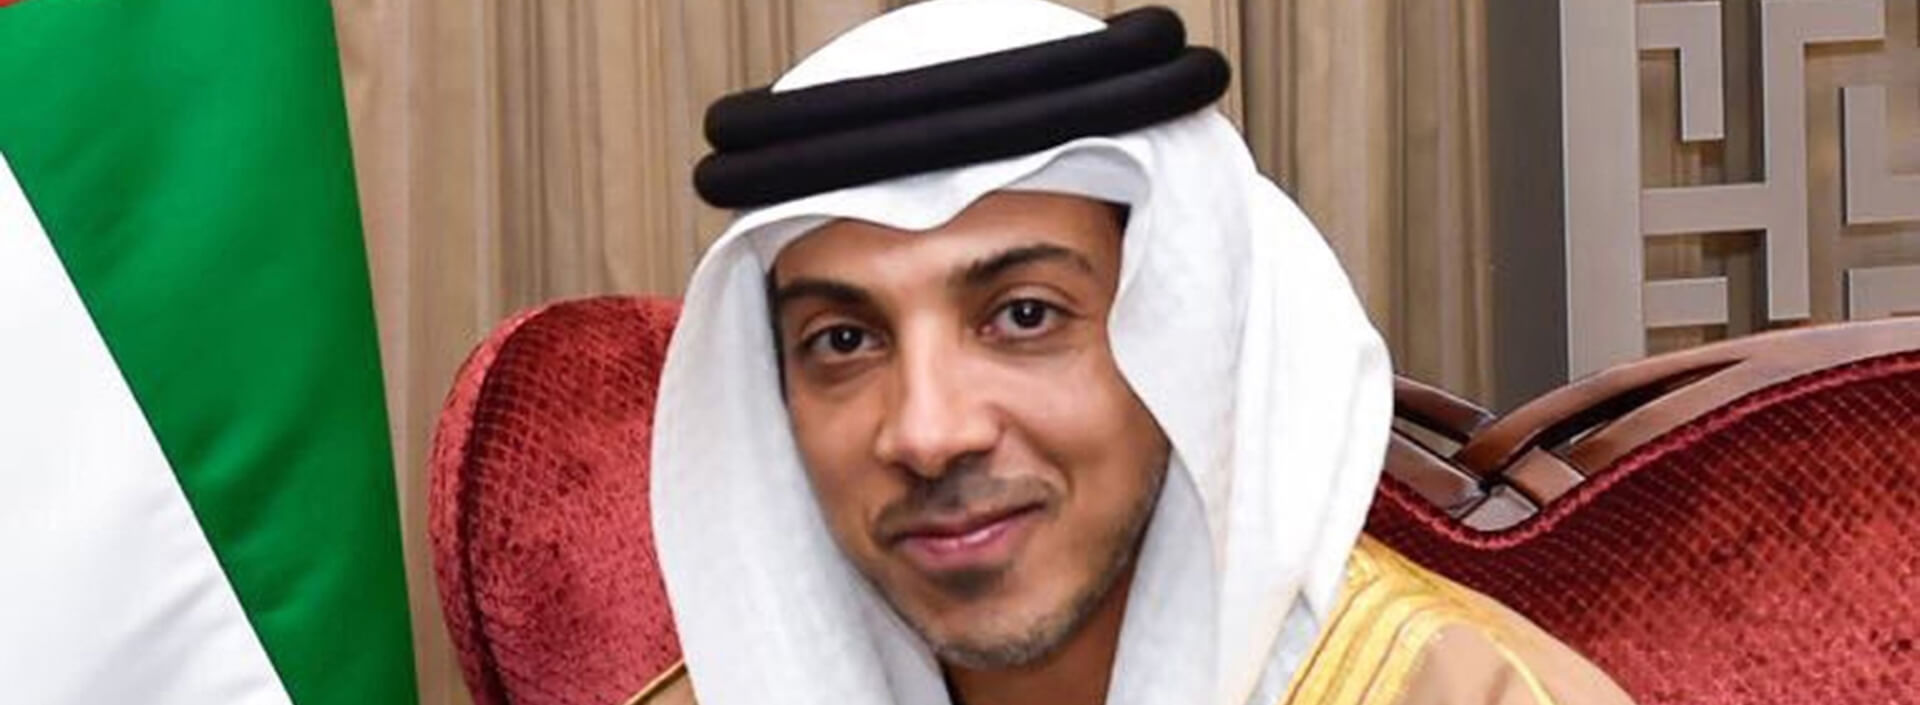 Cabinet restructures Board of Directors of Emirates Investment Authority